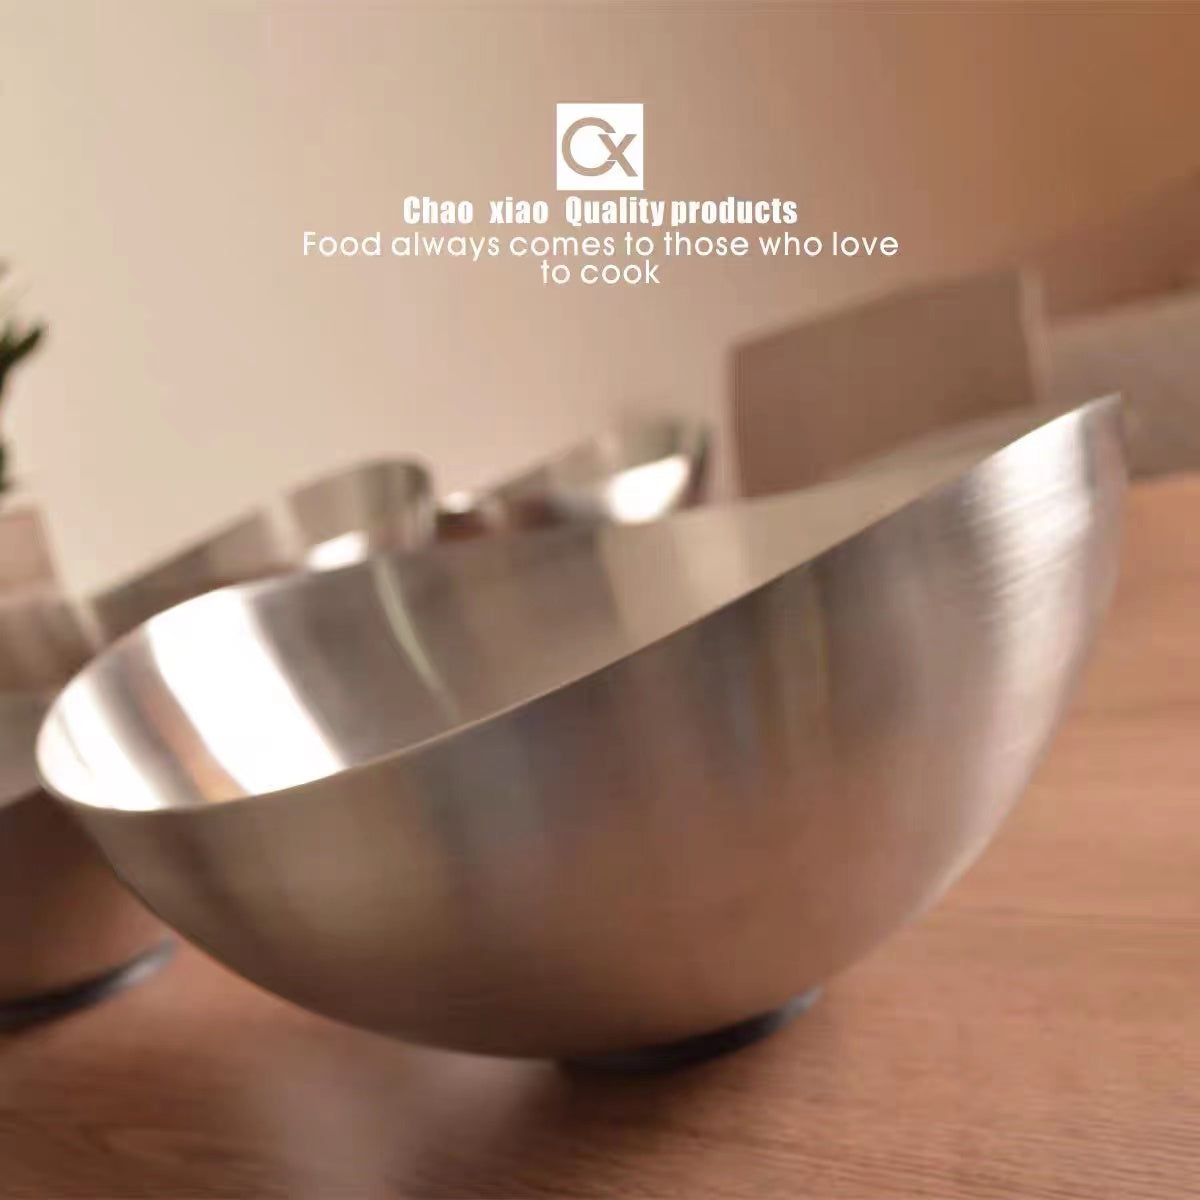 Hammered Stainless Steel Server Mixing Bowl - 4 Seasons Home Gadgets